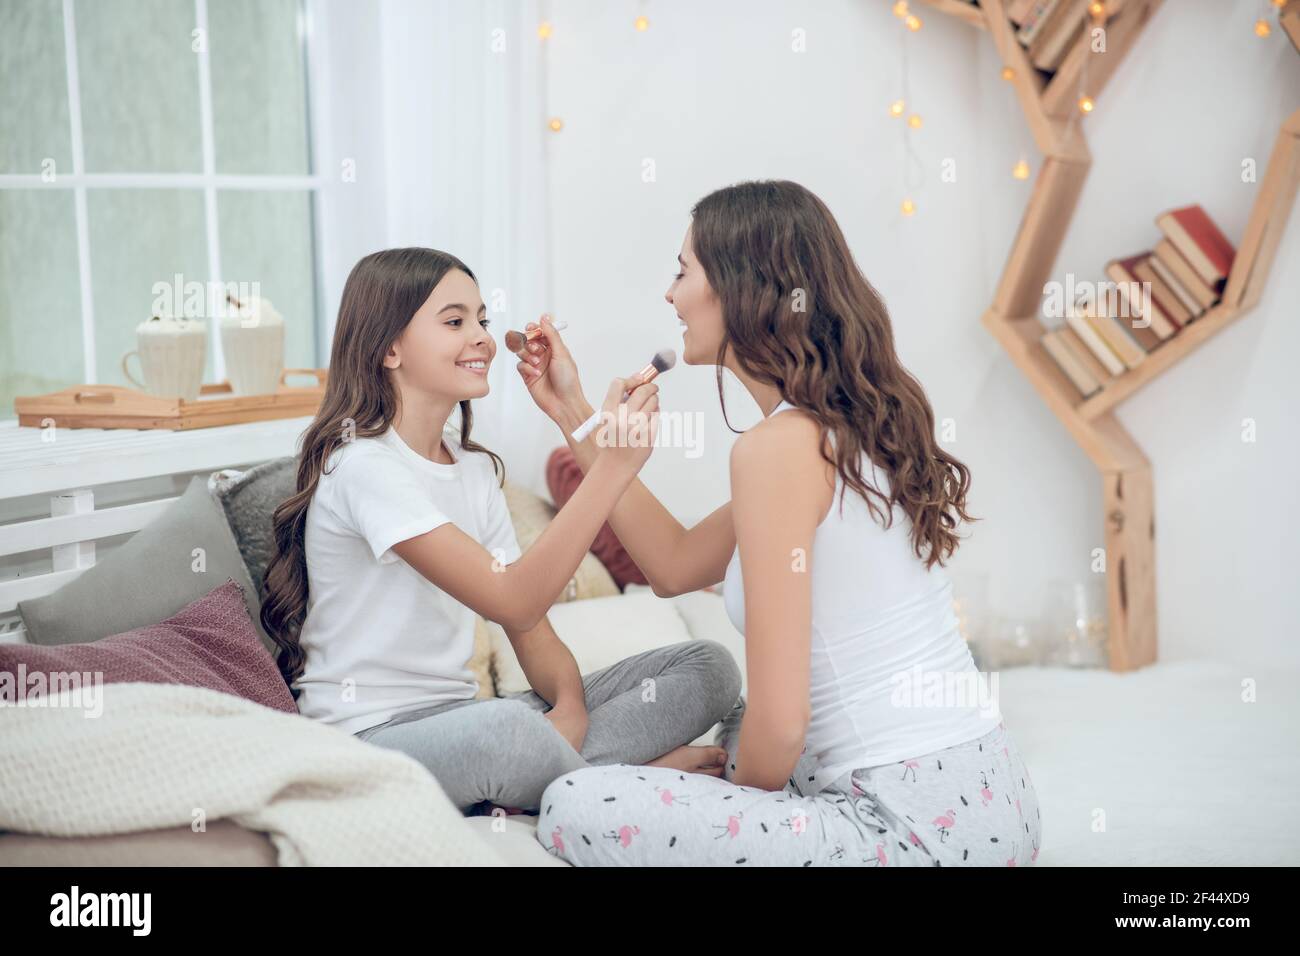 Mom and daughter with brushes sitting opposite each other Stock Photo